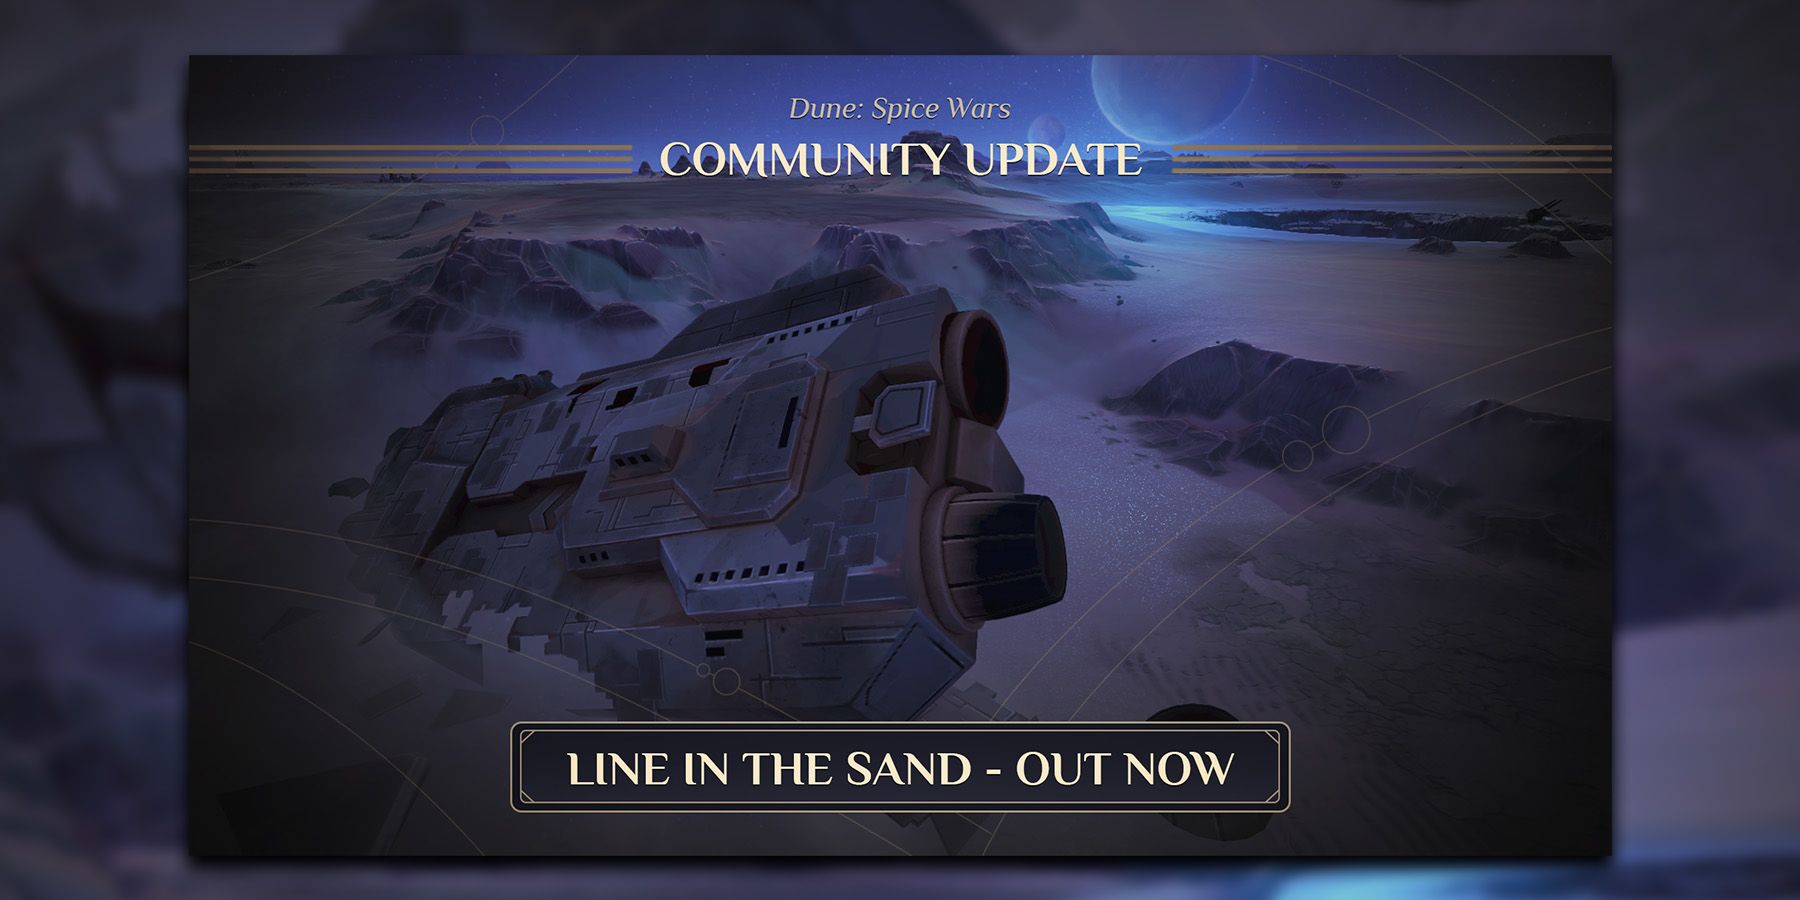 dune-spice-wars-line-in-the-sand